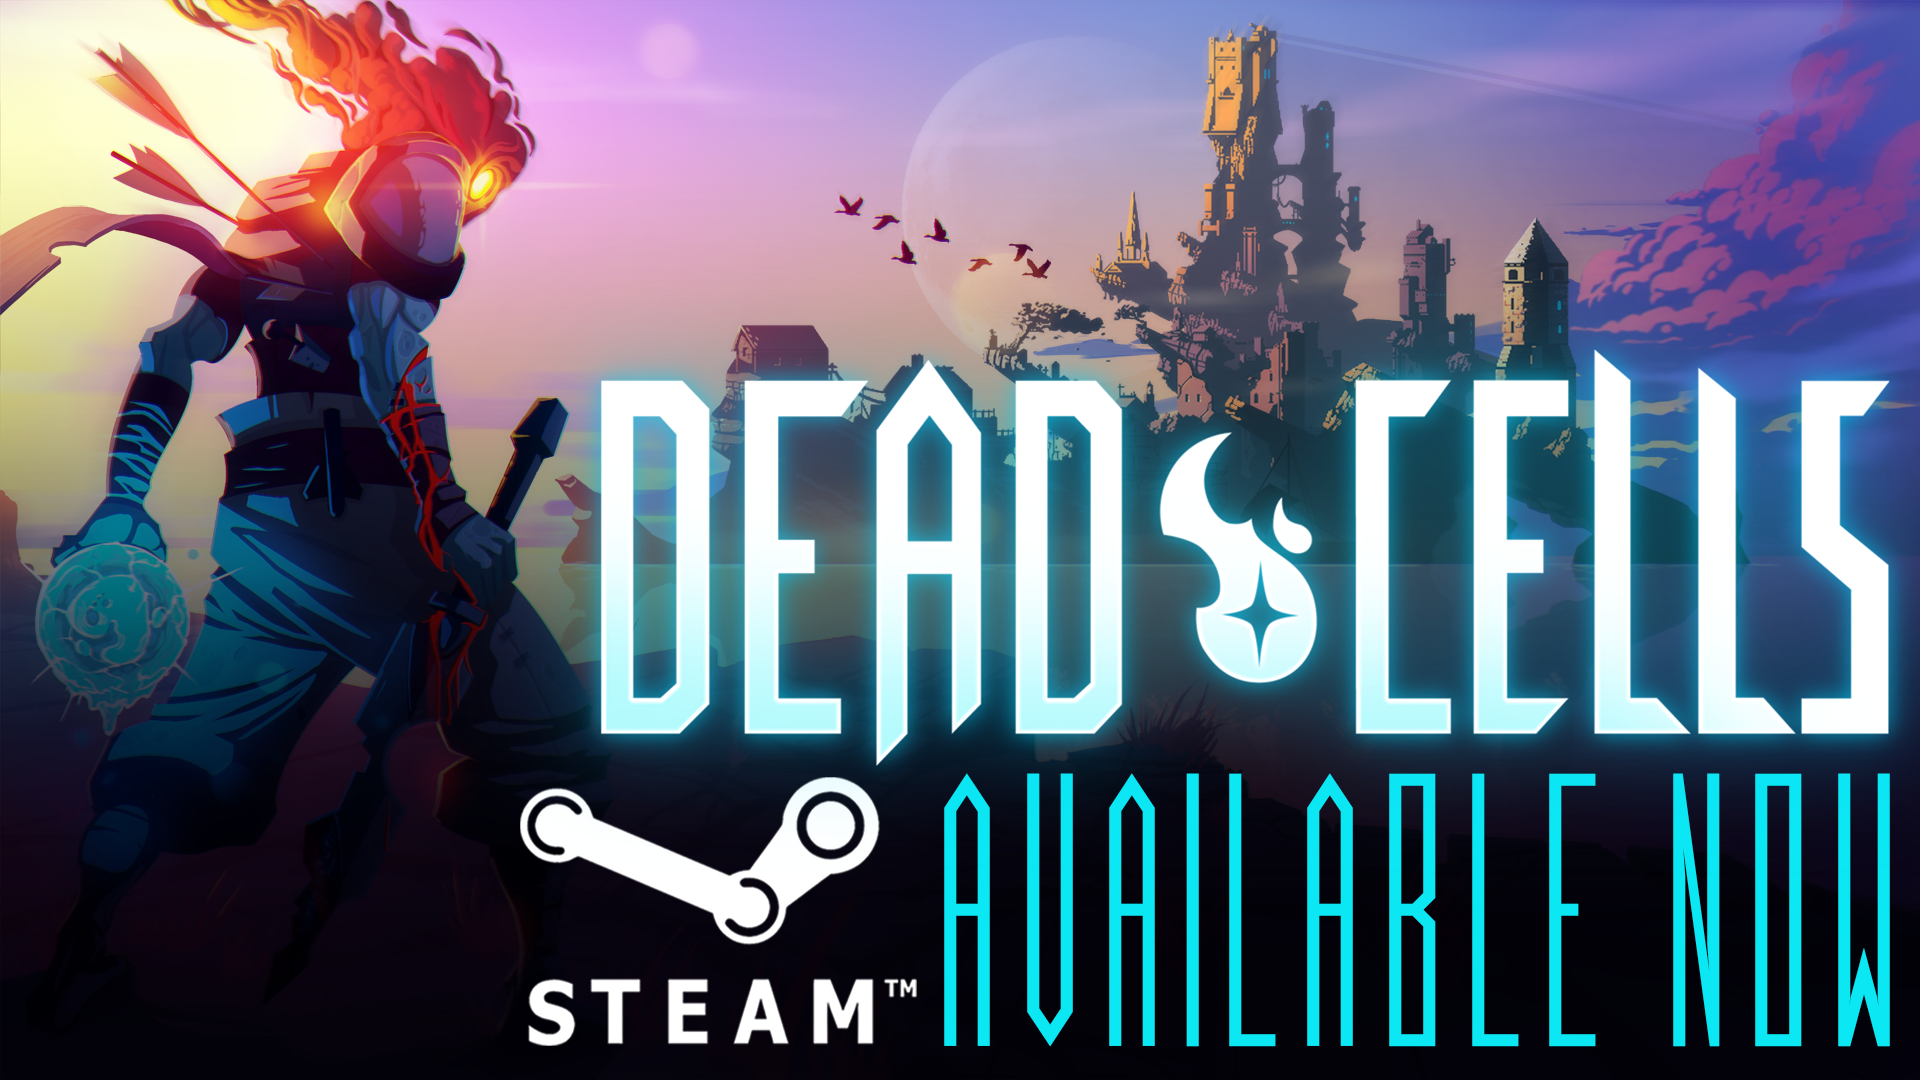 Dead Cells on Steam